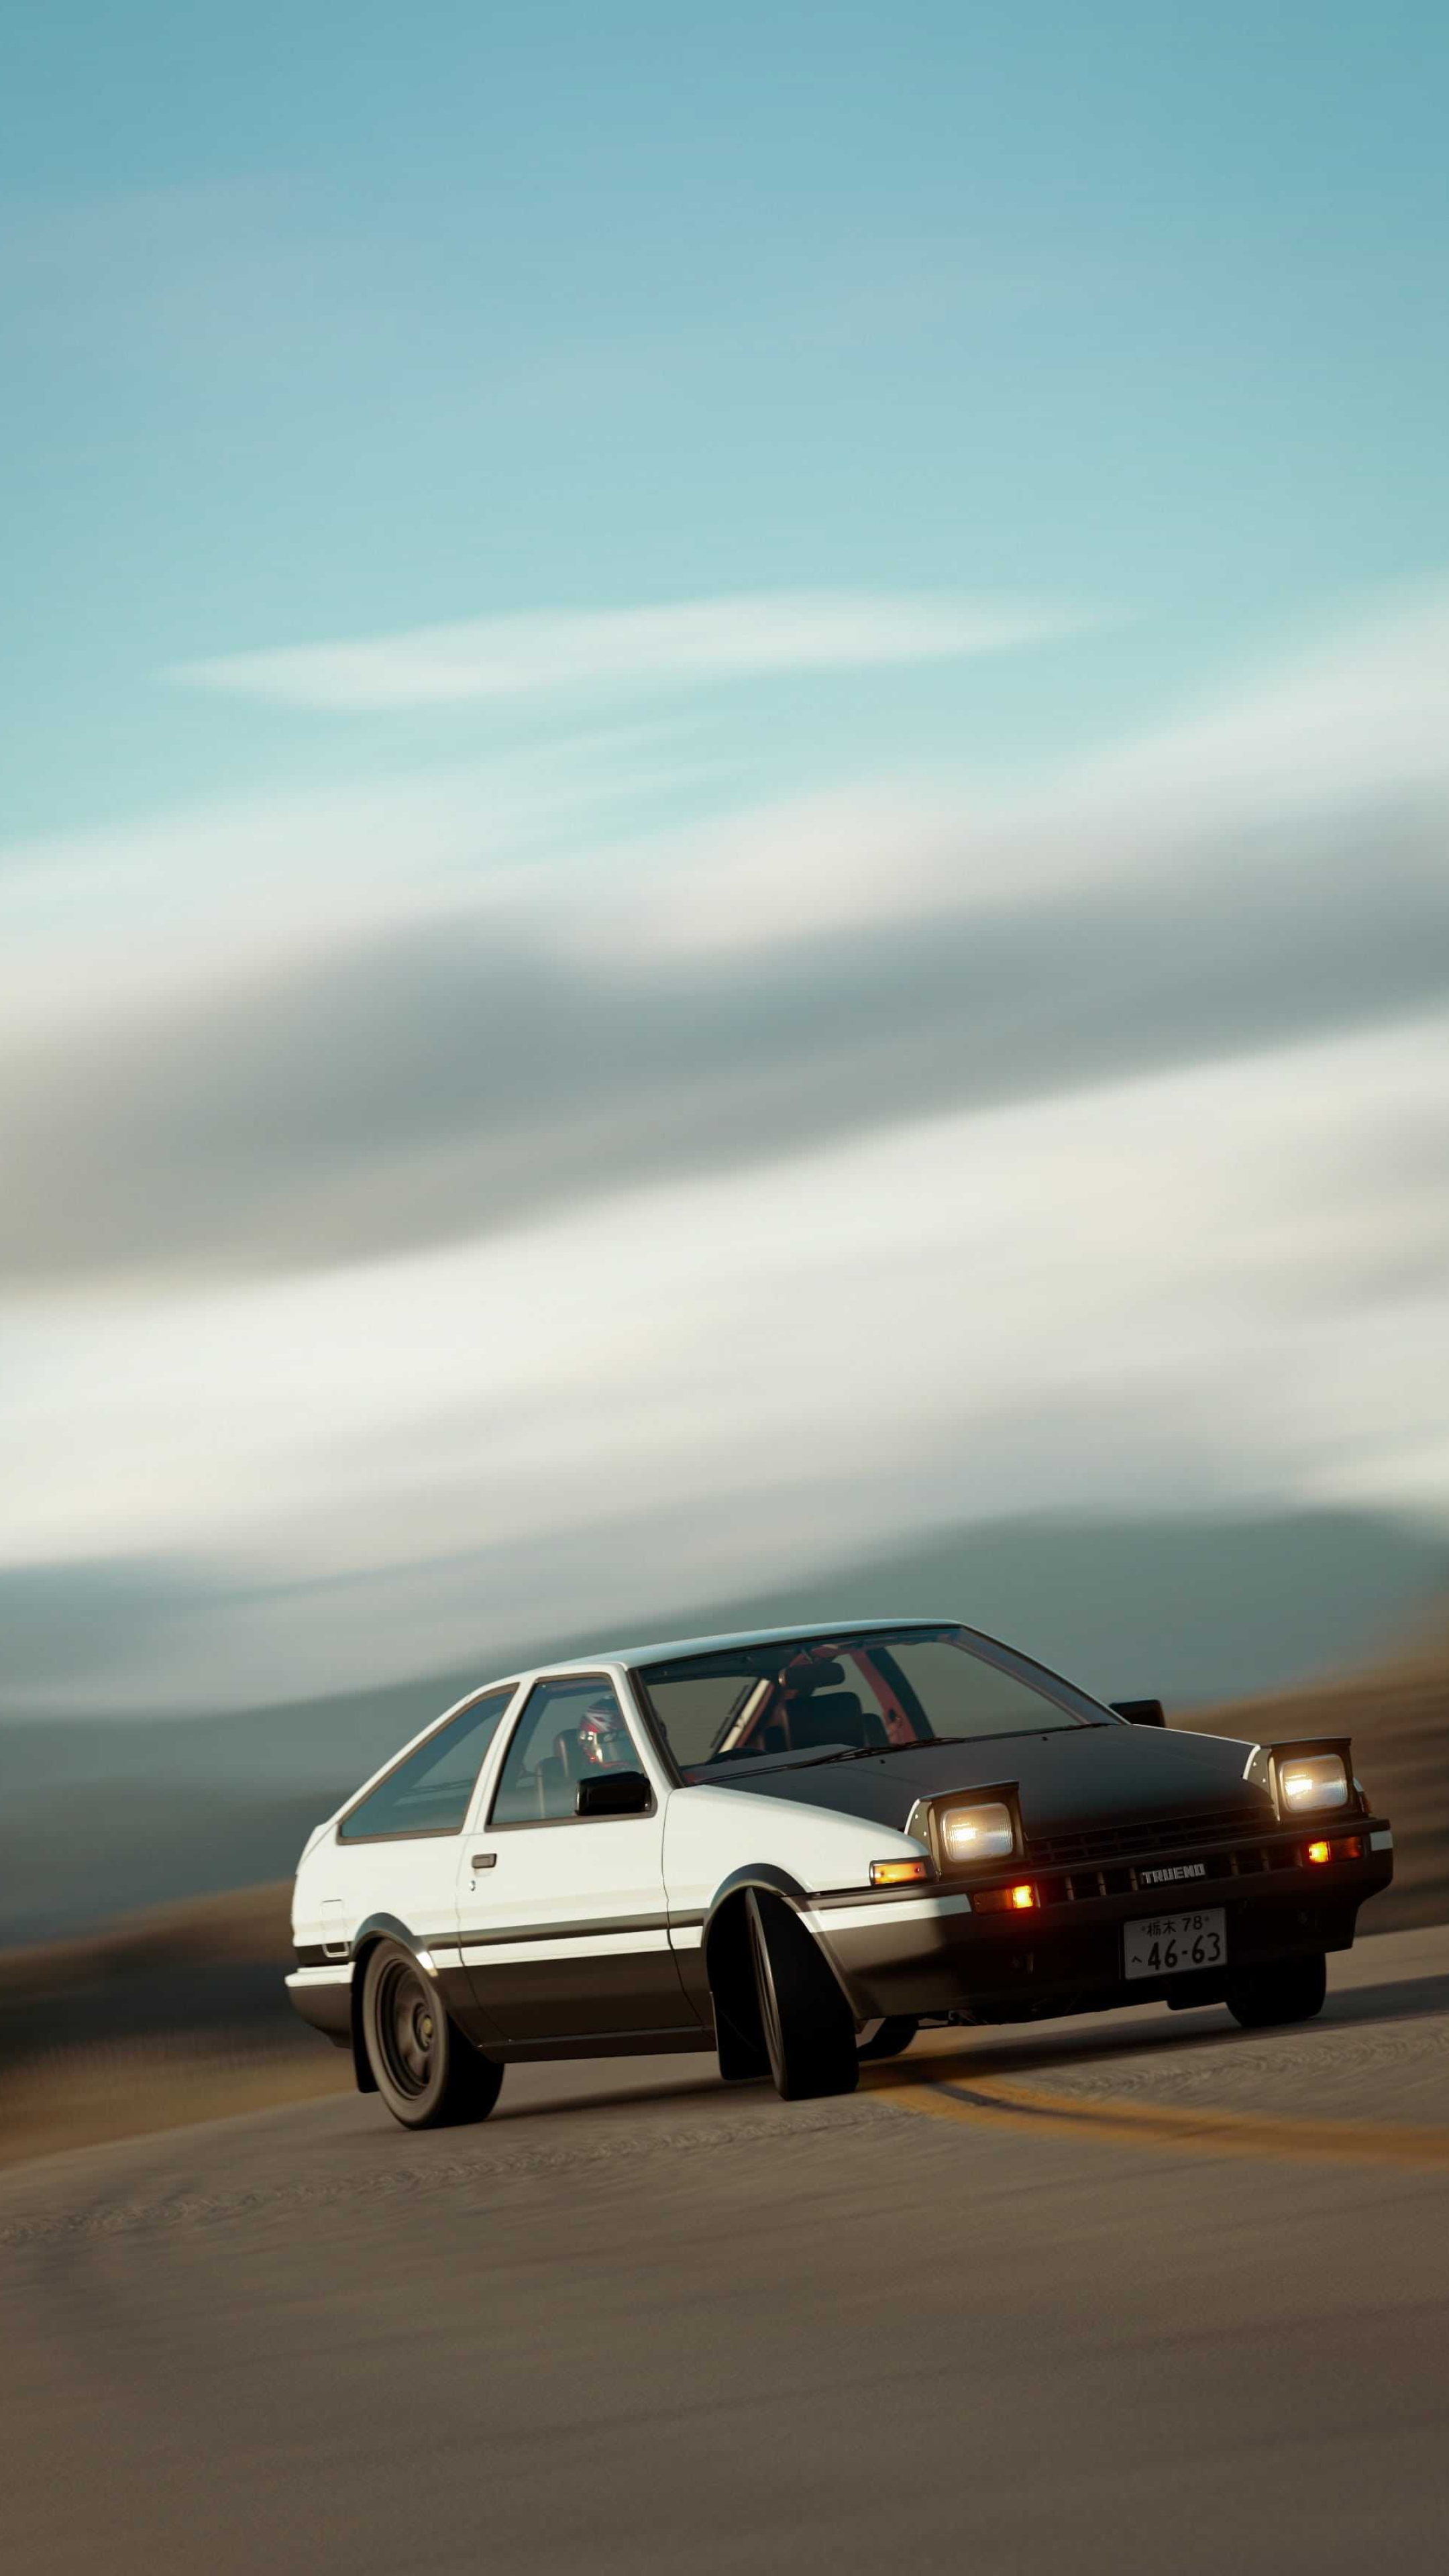 Initial D Anime, Racing anime wallpaper, Speed thrills, Heart-pounding action, 2160x3840 4K Handy